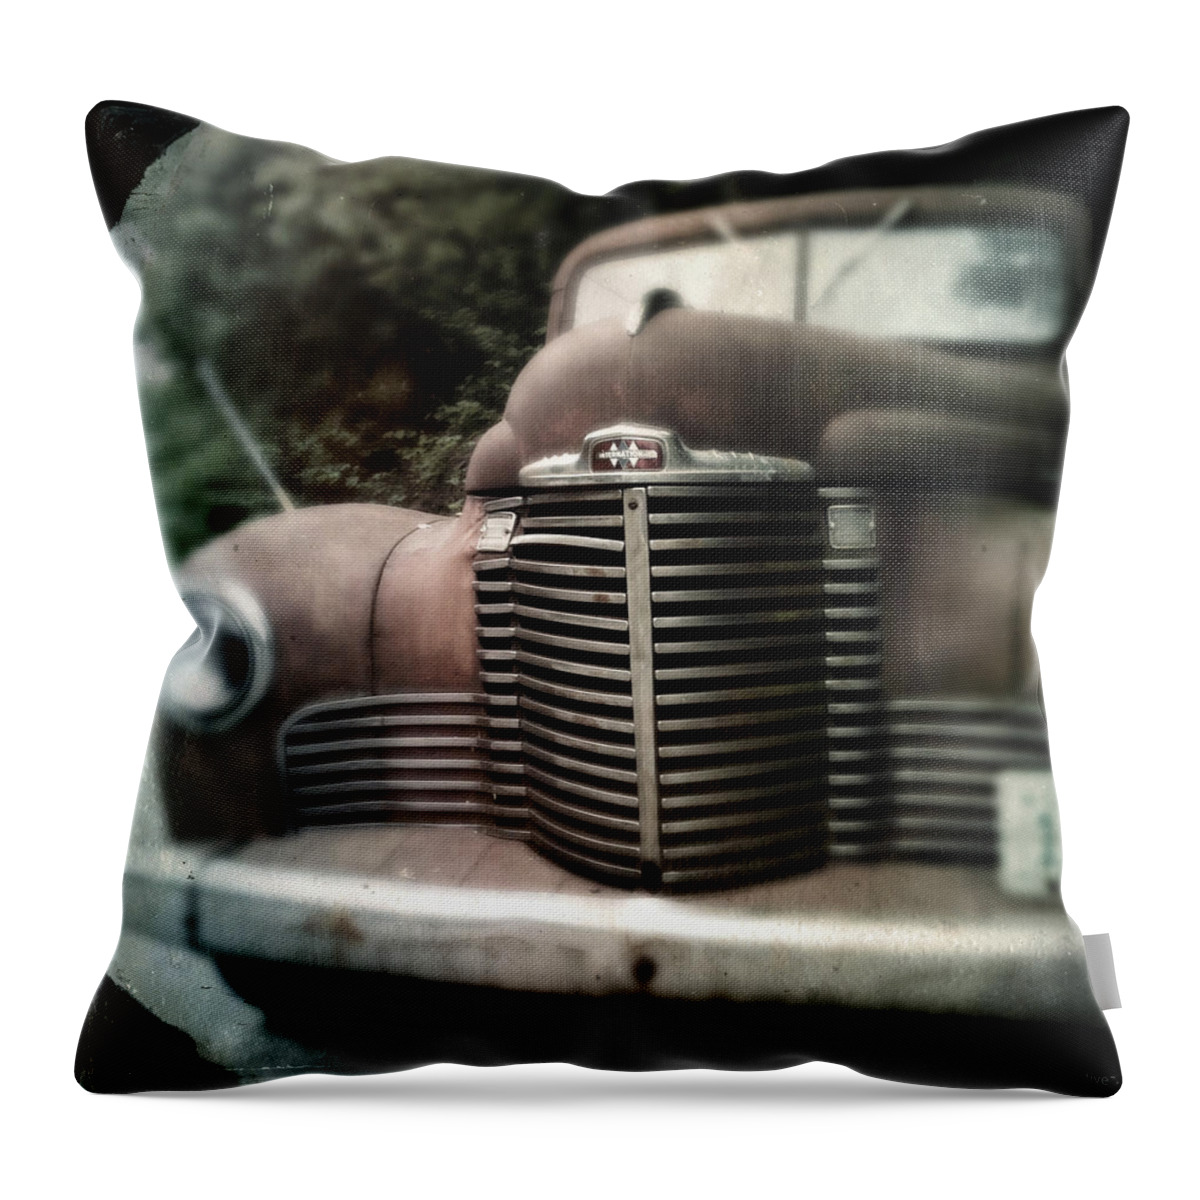 1941 Throw Pillow featuring the photograph Work Horse by Tim Nyberg